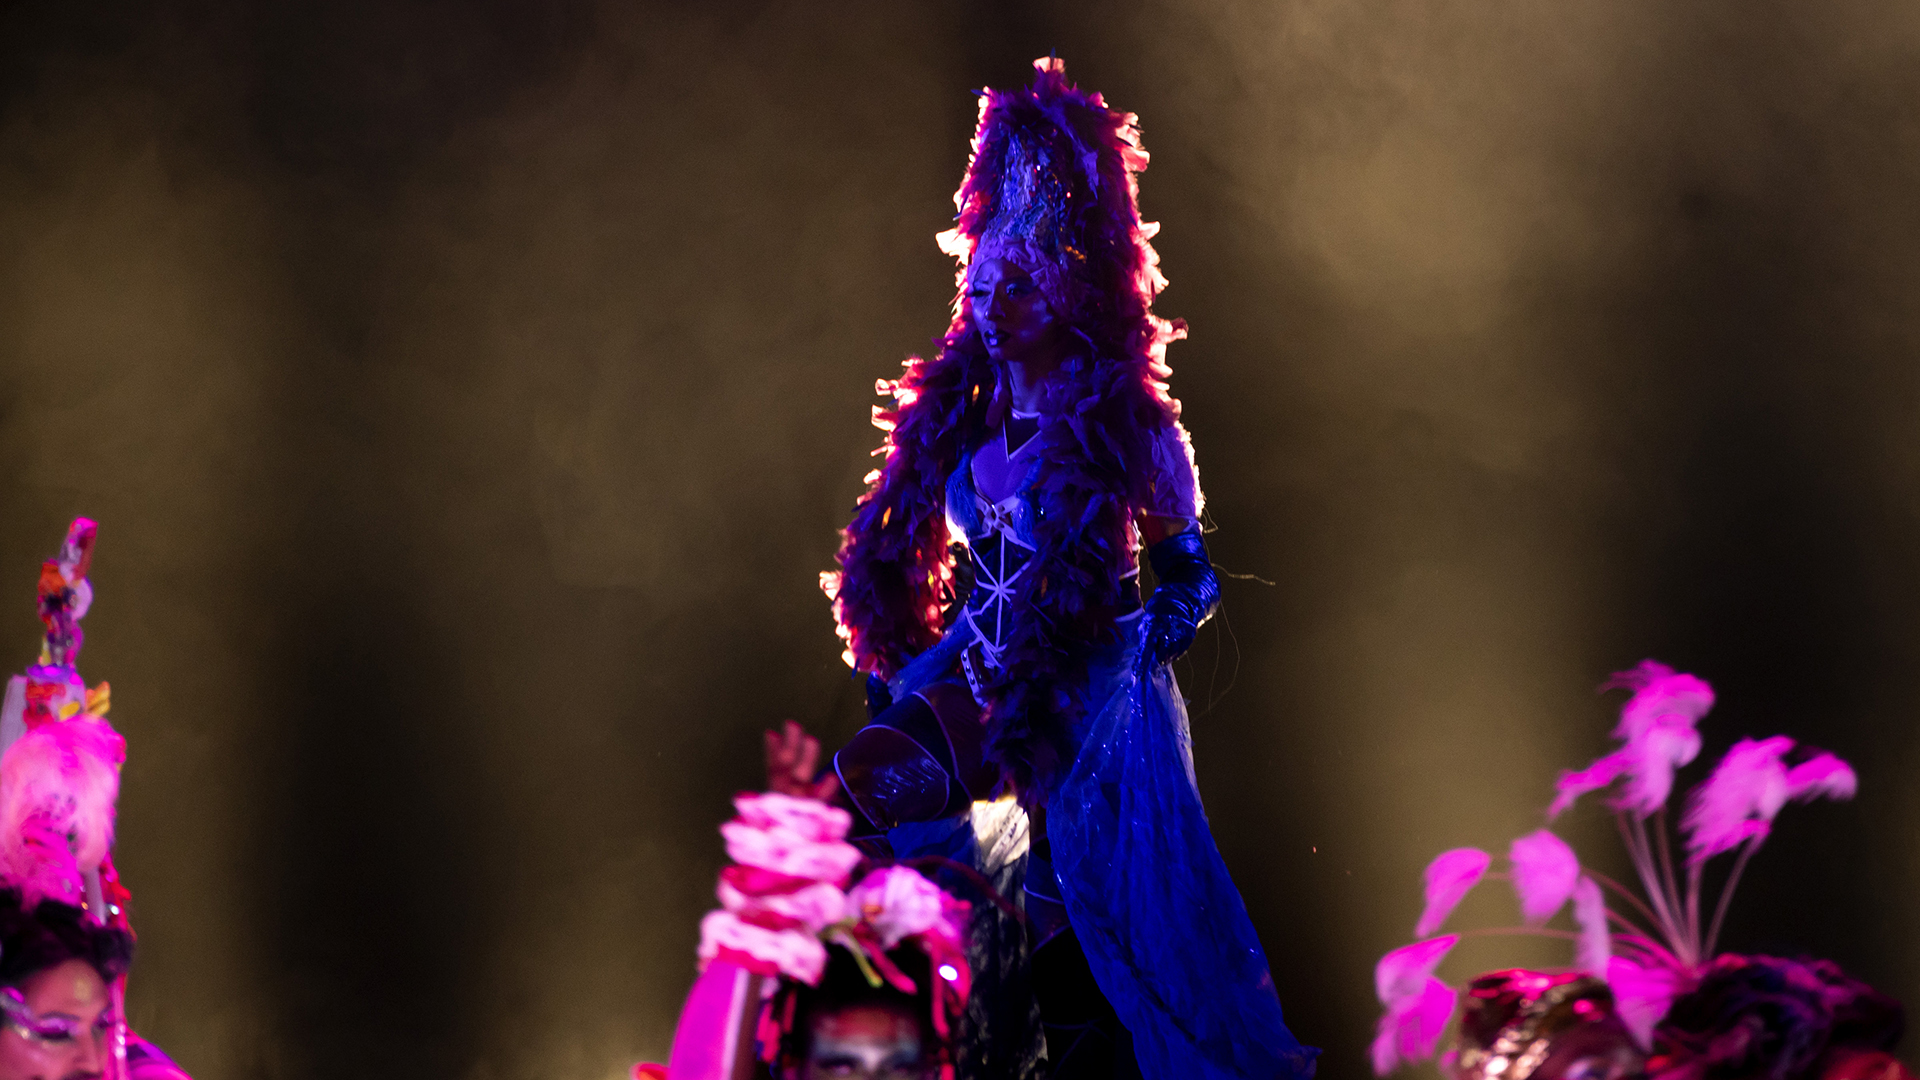 a silhouette of a person in a long dress and tall headwear, with a purplish hue around her ringed by a reddish-orange light that looks like fire, performs on stage